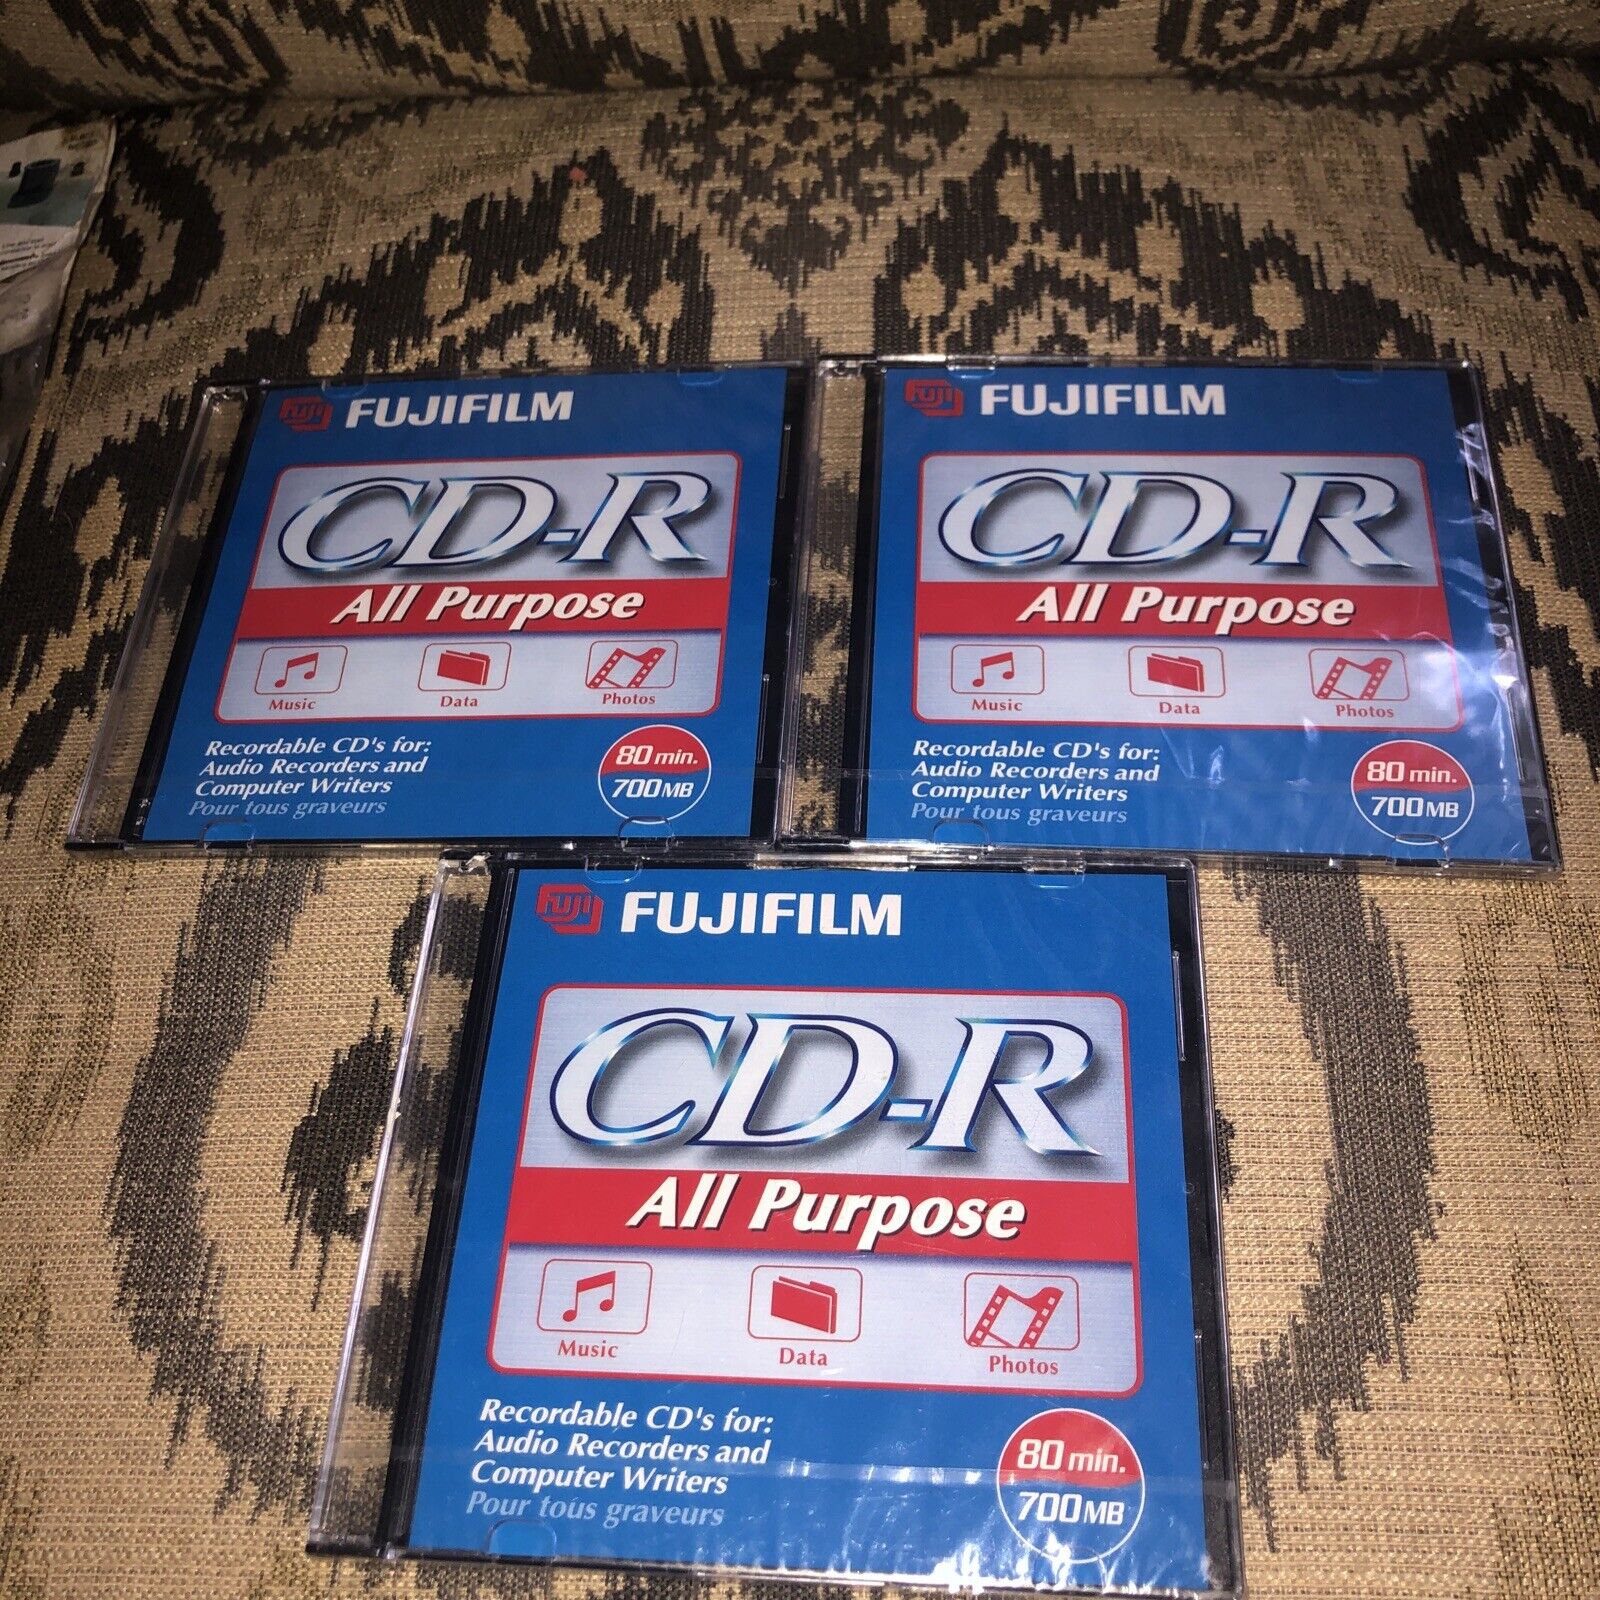 Fujifilm CD-R All Purpose  80 Minutes Music/Data/Photos 700MB . Sealed Lot Of 3